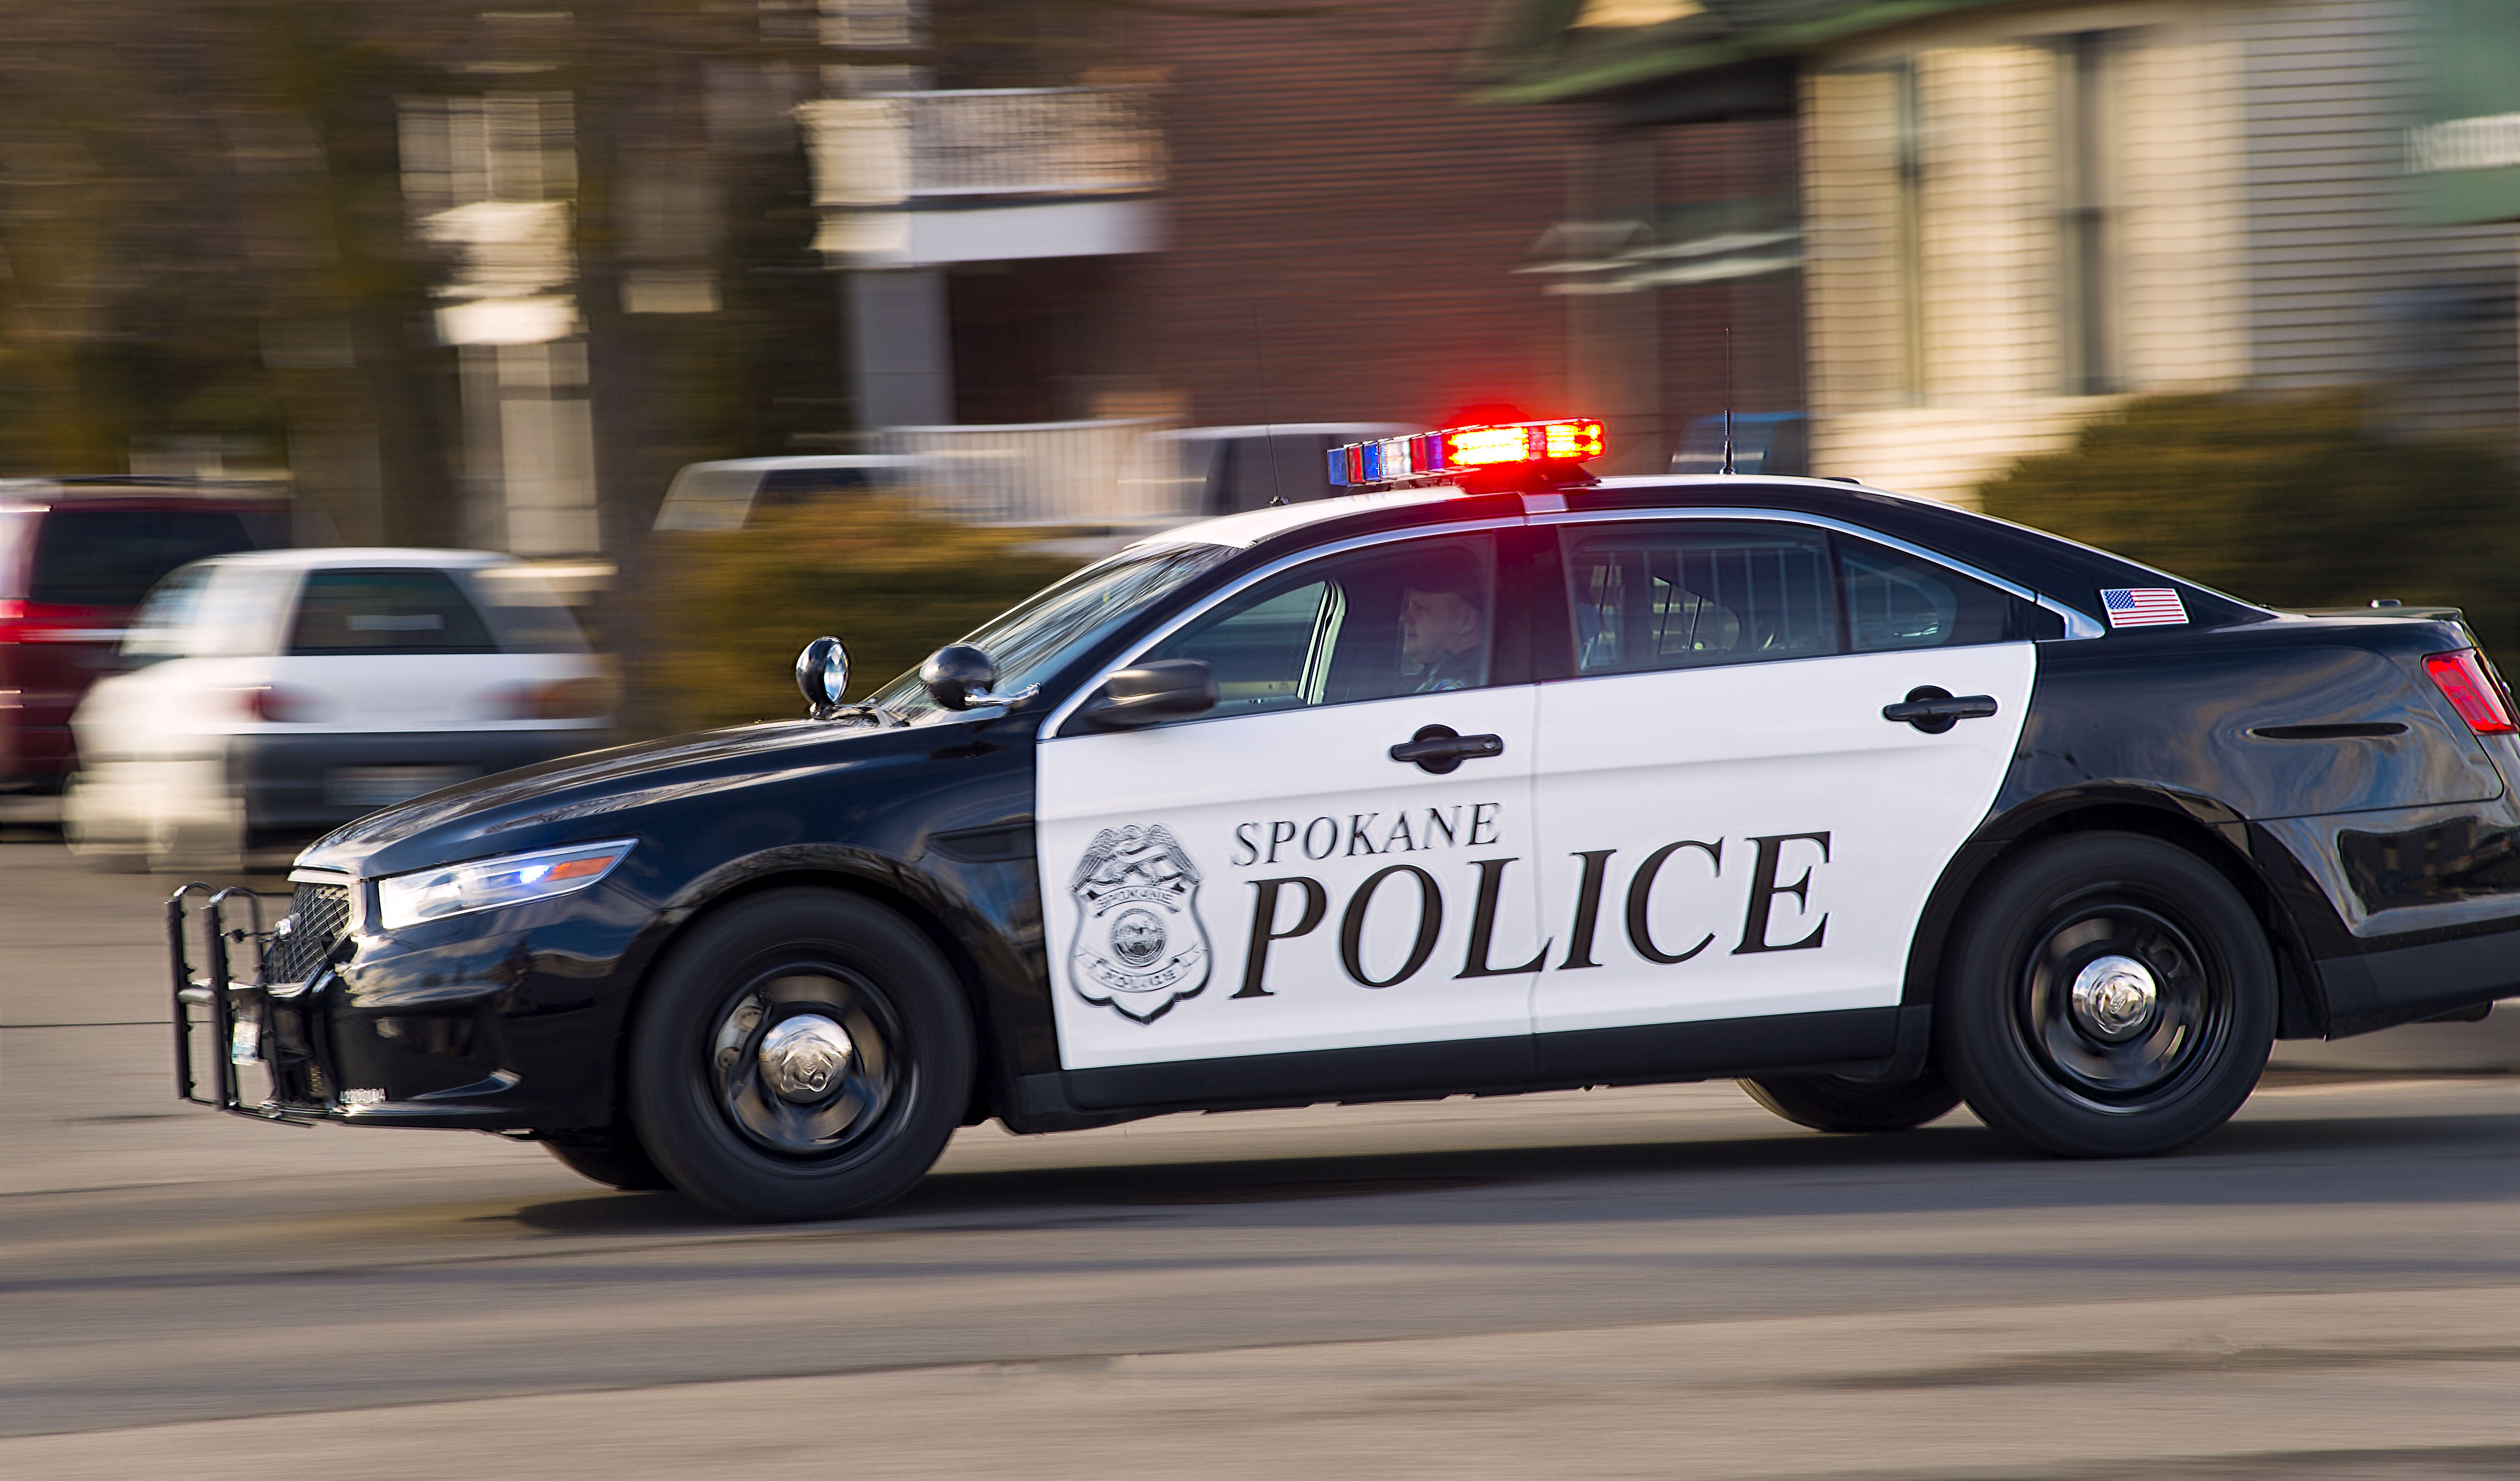 new-spokane-police-cars-handle-test-runs-with-quiet-ease-the